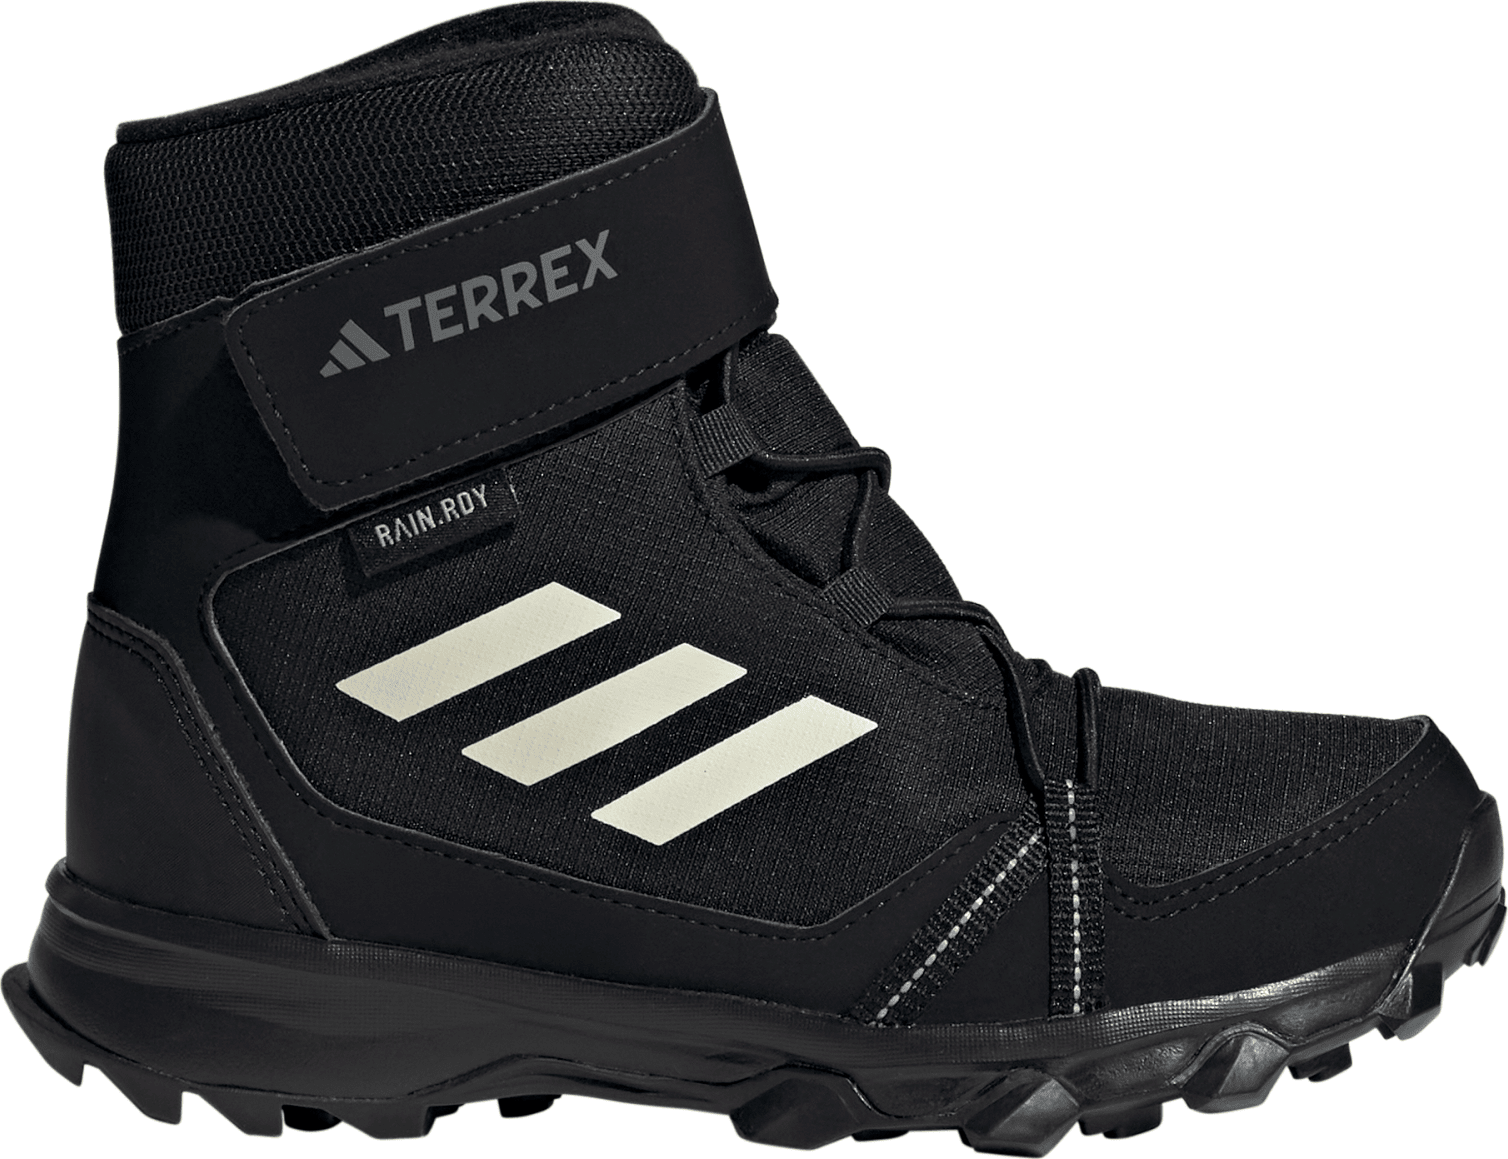 Kids' Terrex Snow Hook-and-Loop COLD.RDY Winter Shoes Cblack/Cwhite/Grefou